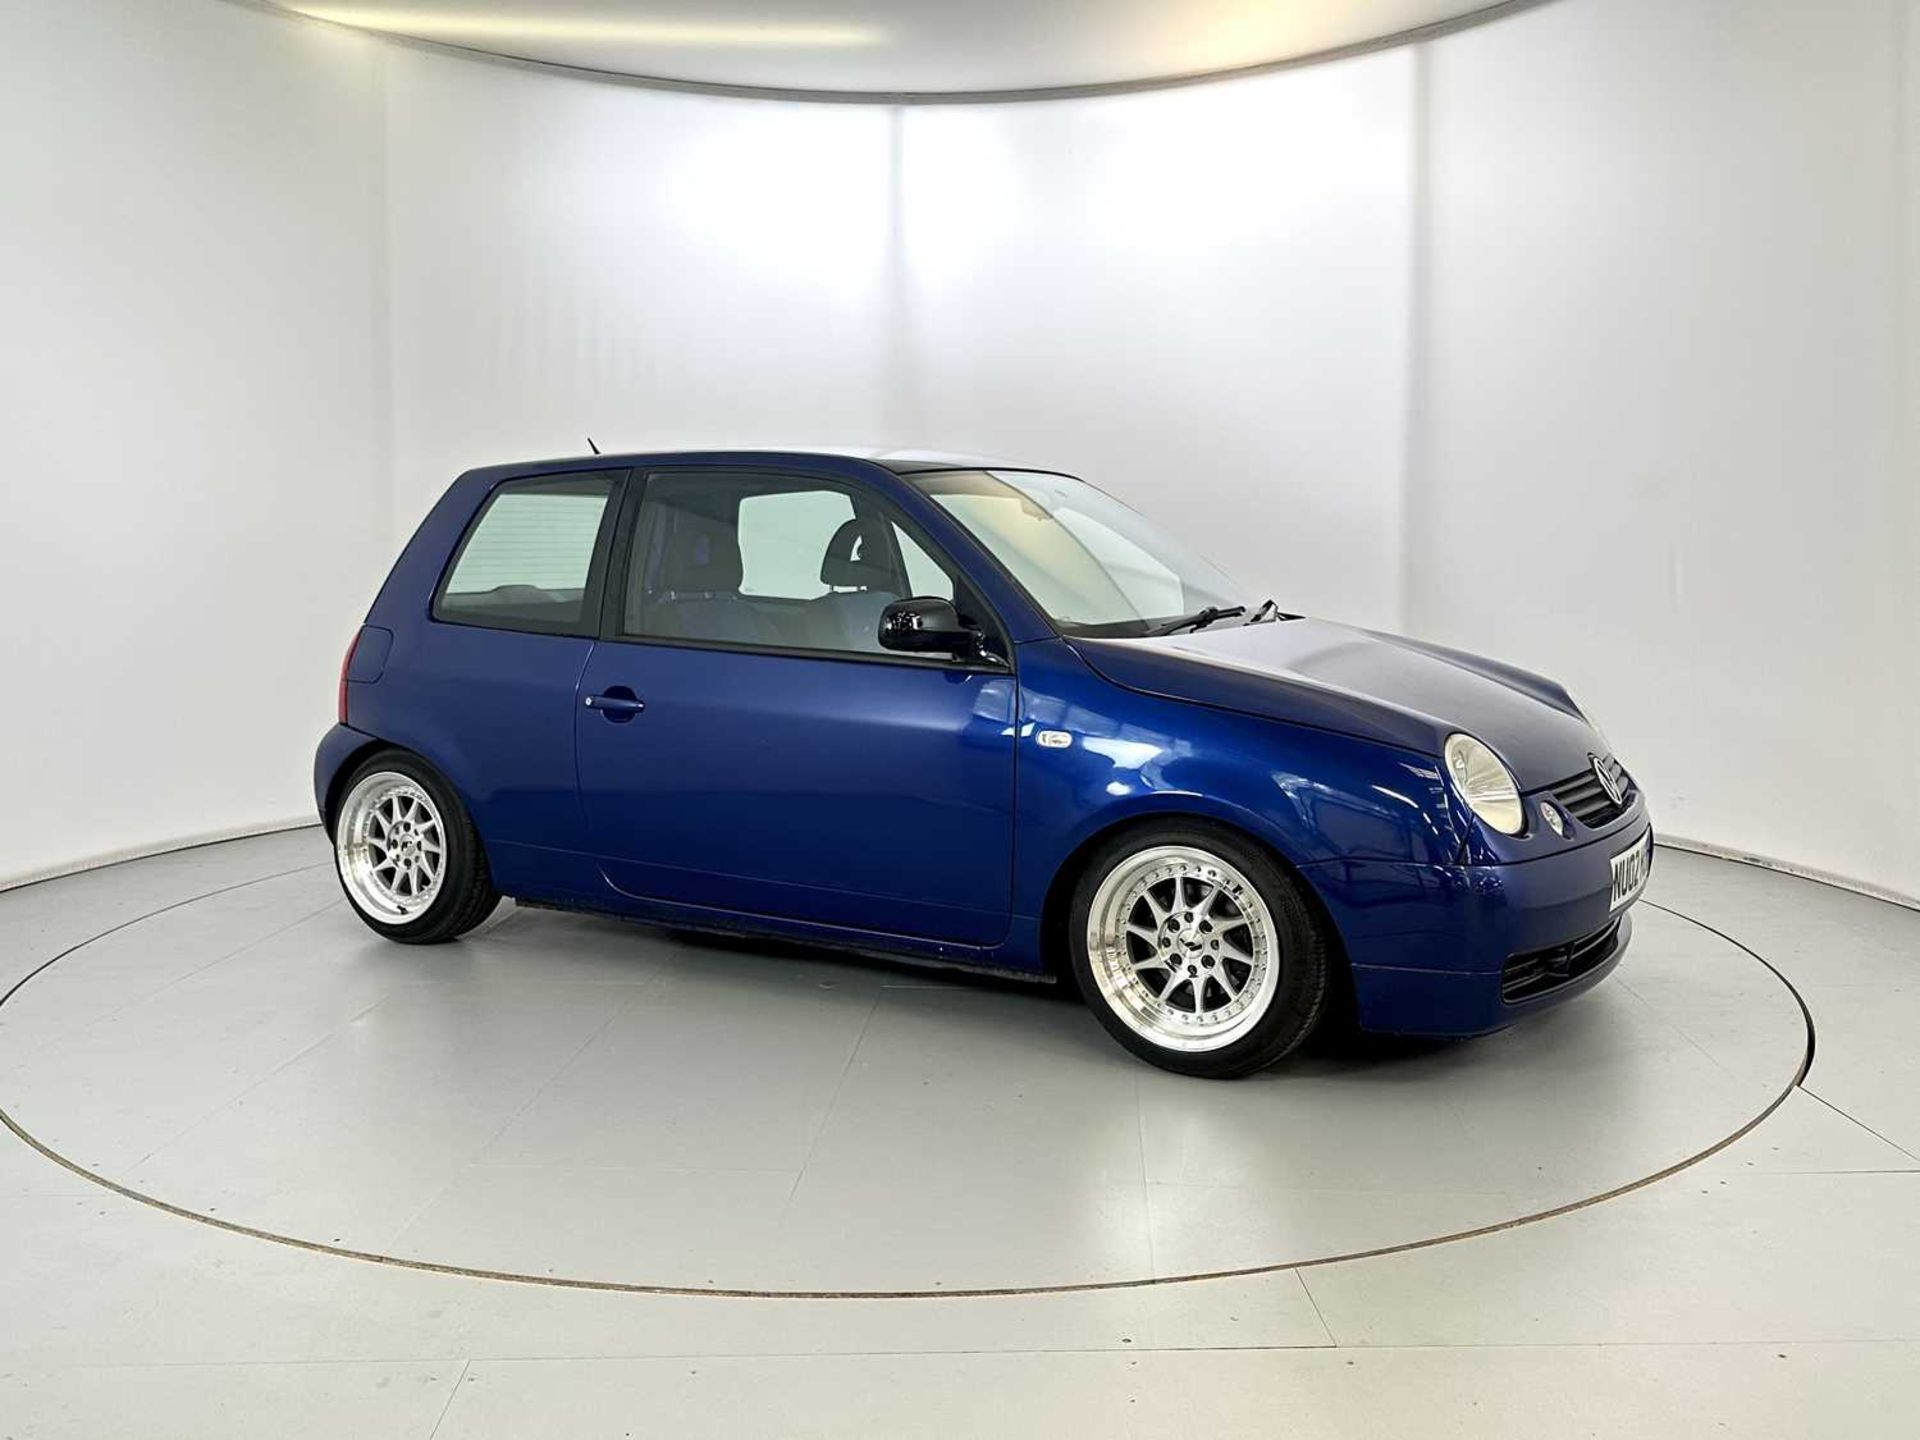 2002 Volkswagen Lupo - Image 12 of 28